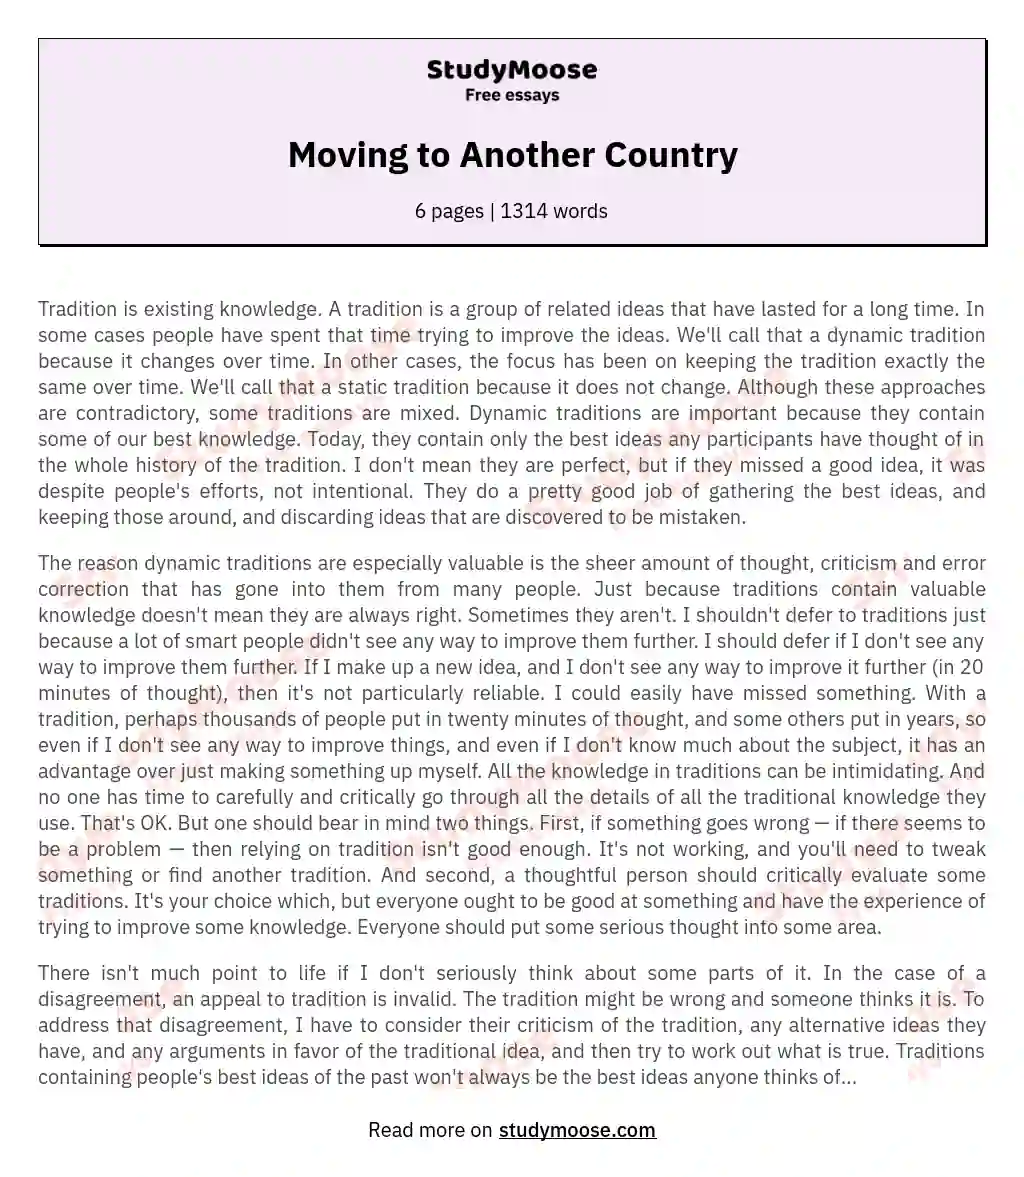 an essay about moving to another country